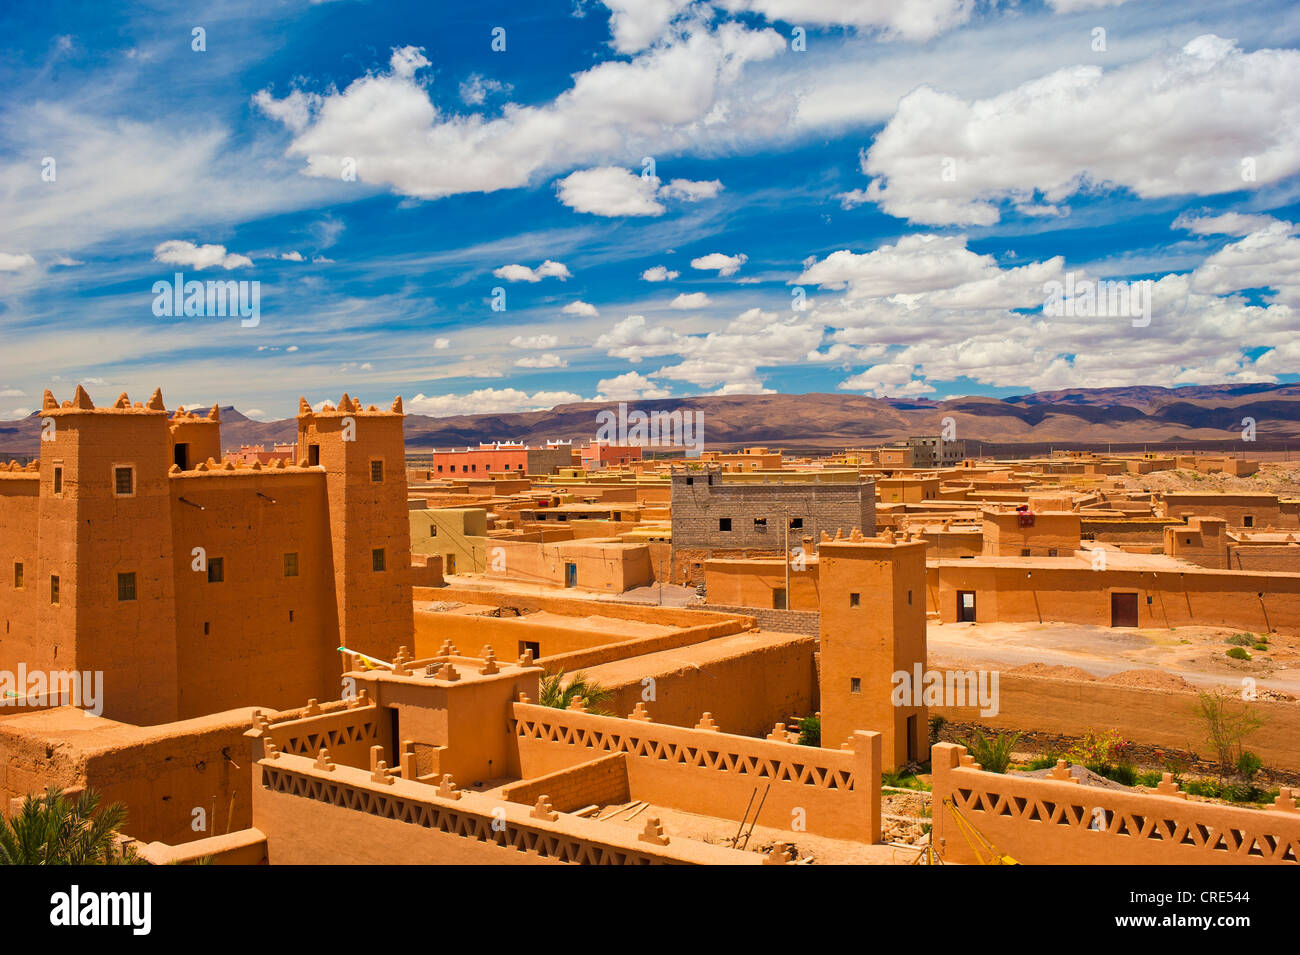 Restored kasbahs, mud fortresses, residential castles of the Berbers, Tighremt, Nekob, southern Morocco, Morocco, Africa Stock Photo